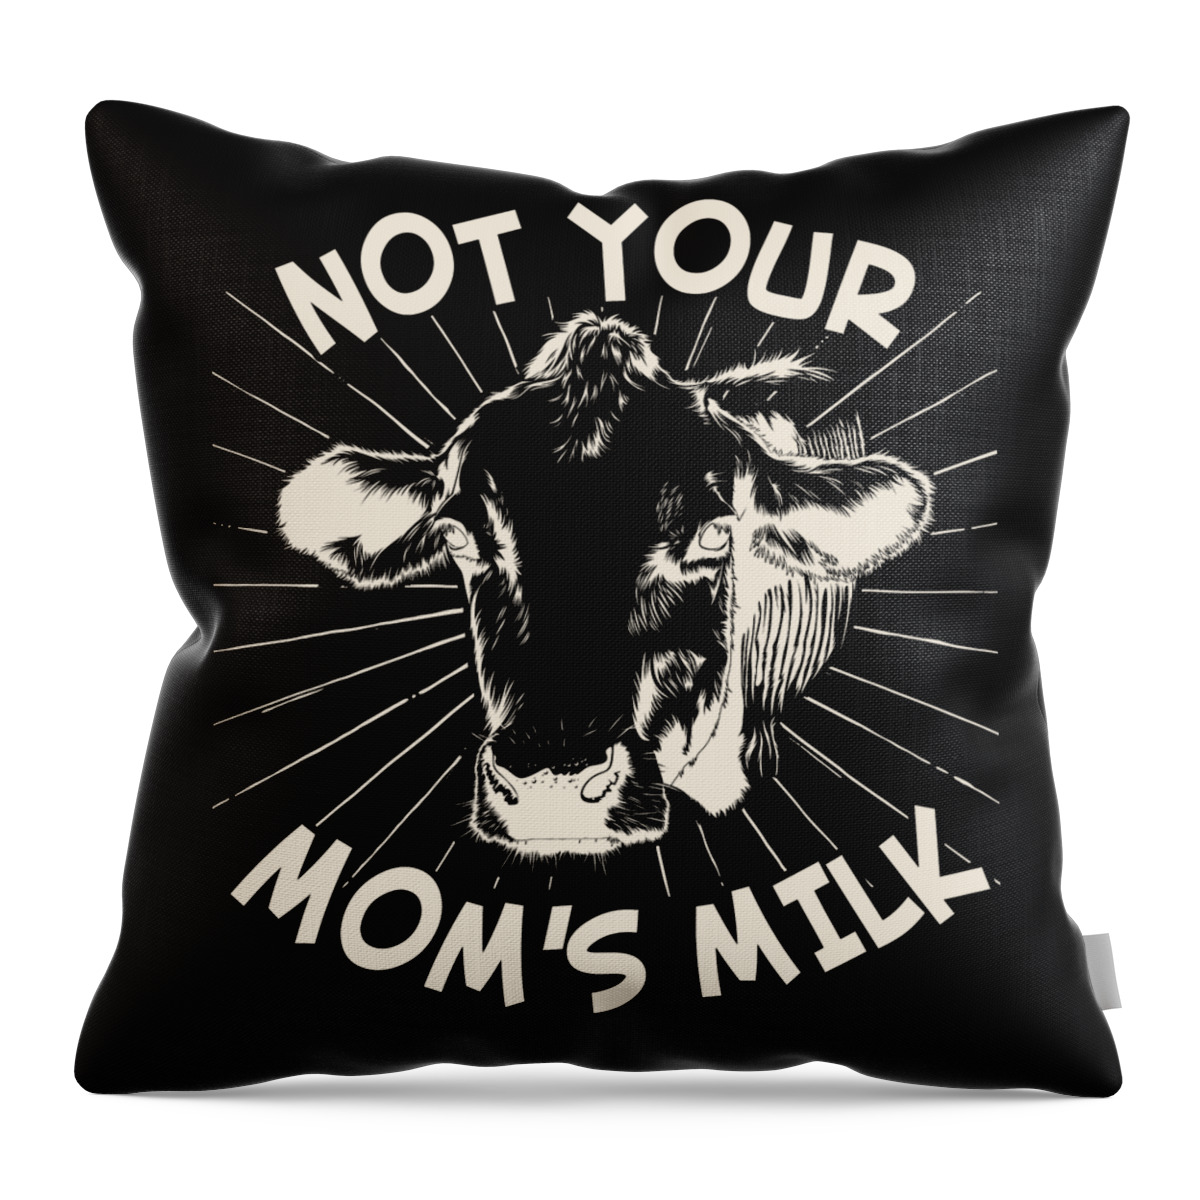 Gifts For Mom Throw Pillow featuring the digital art Not Your Moms Milk Go Vegan by Flippin Sweet Gear